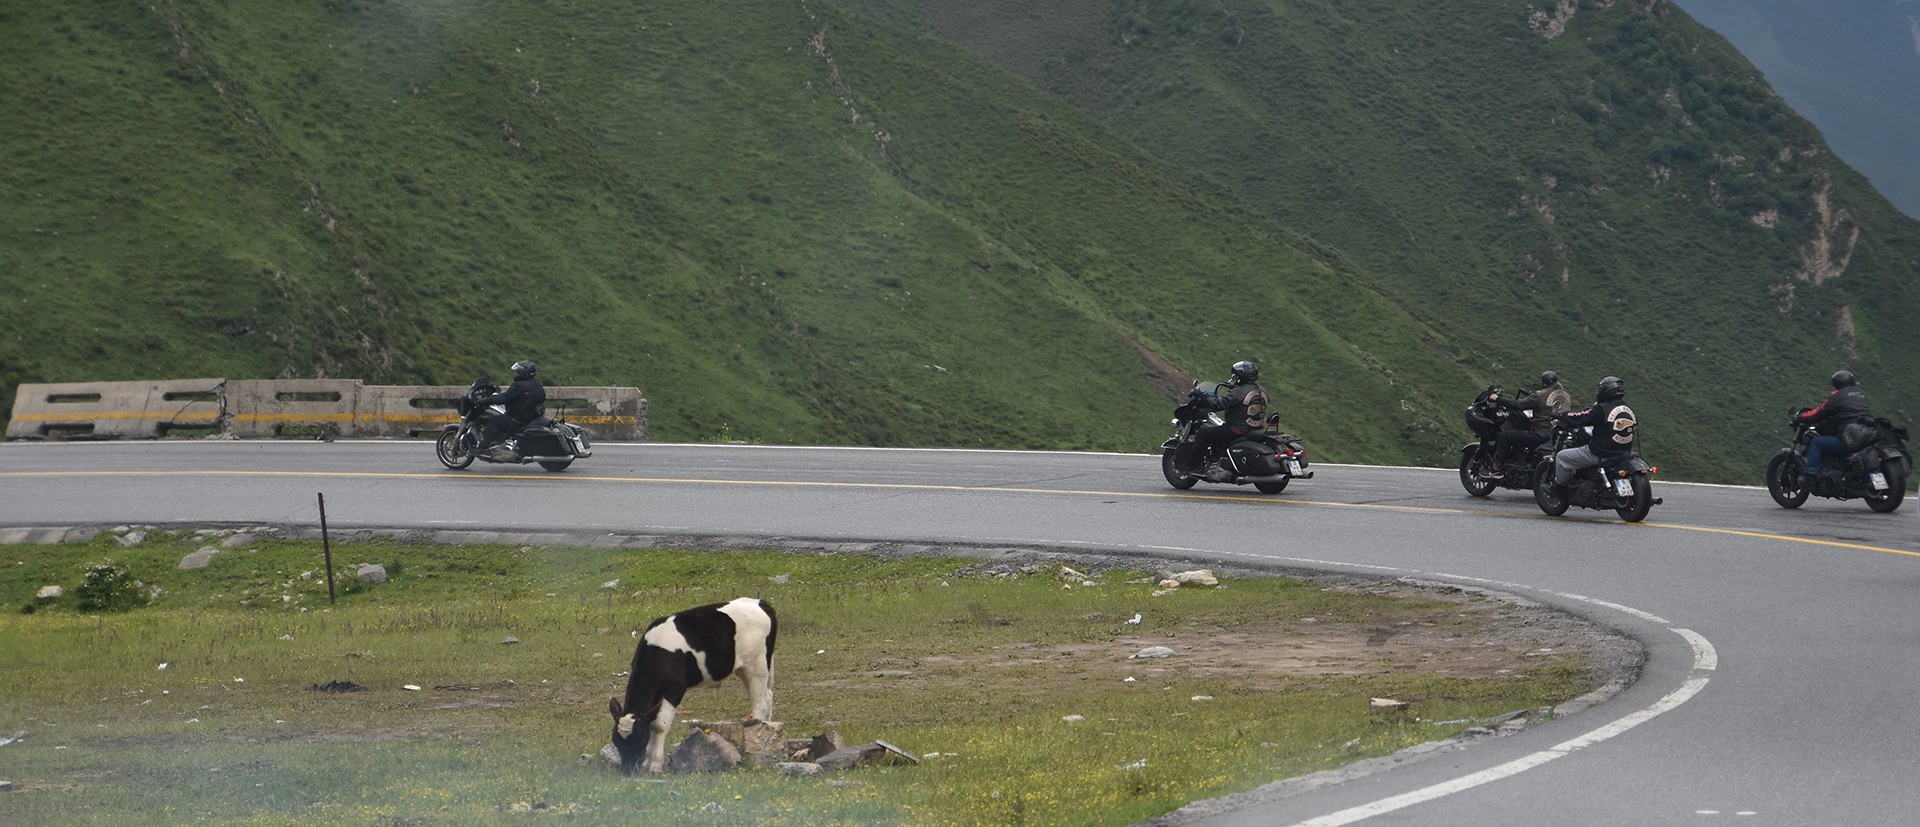 Rental Motorbike Tour from Sichuan to Tibet on 318 Highway